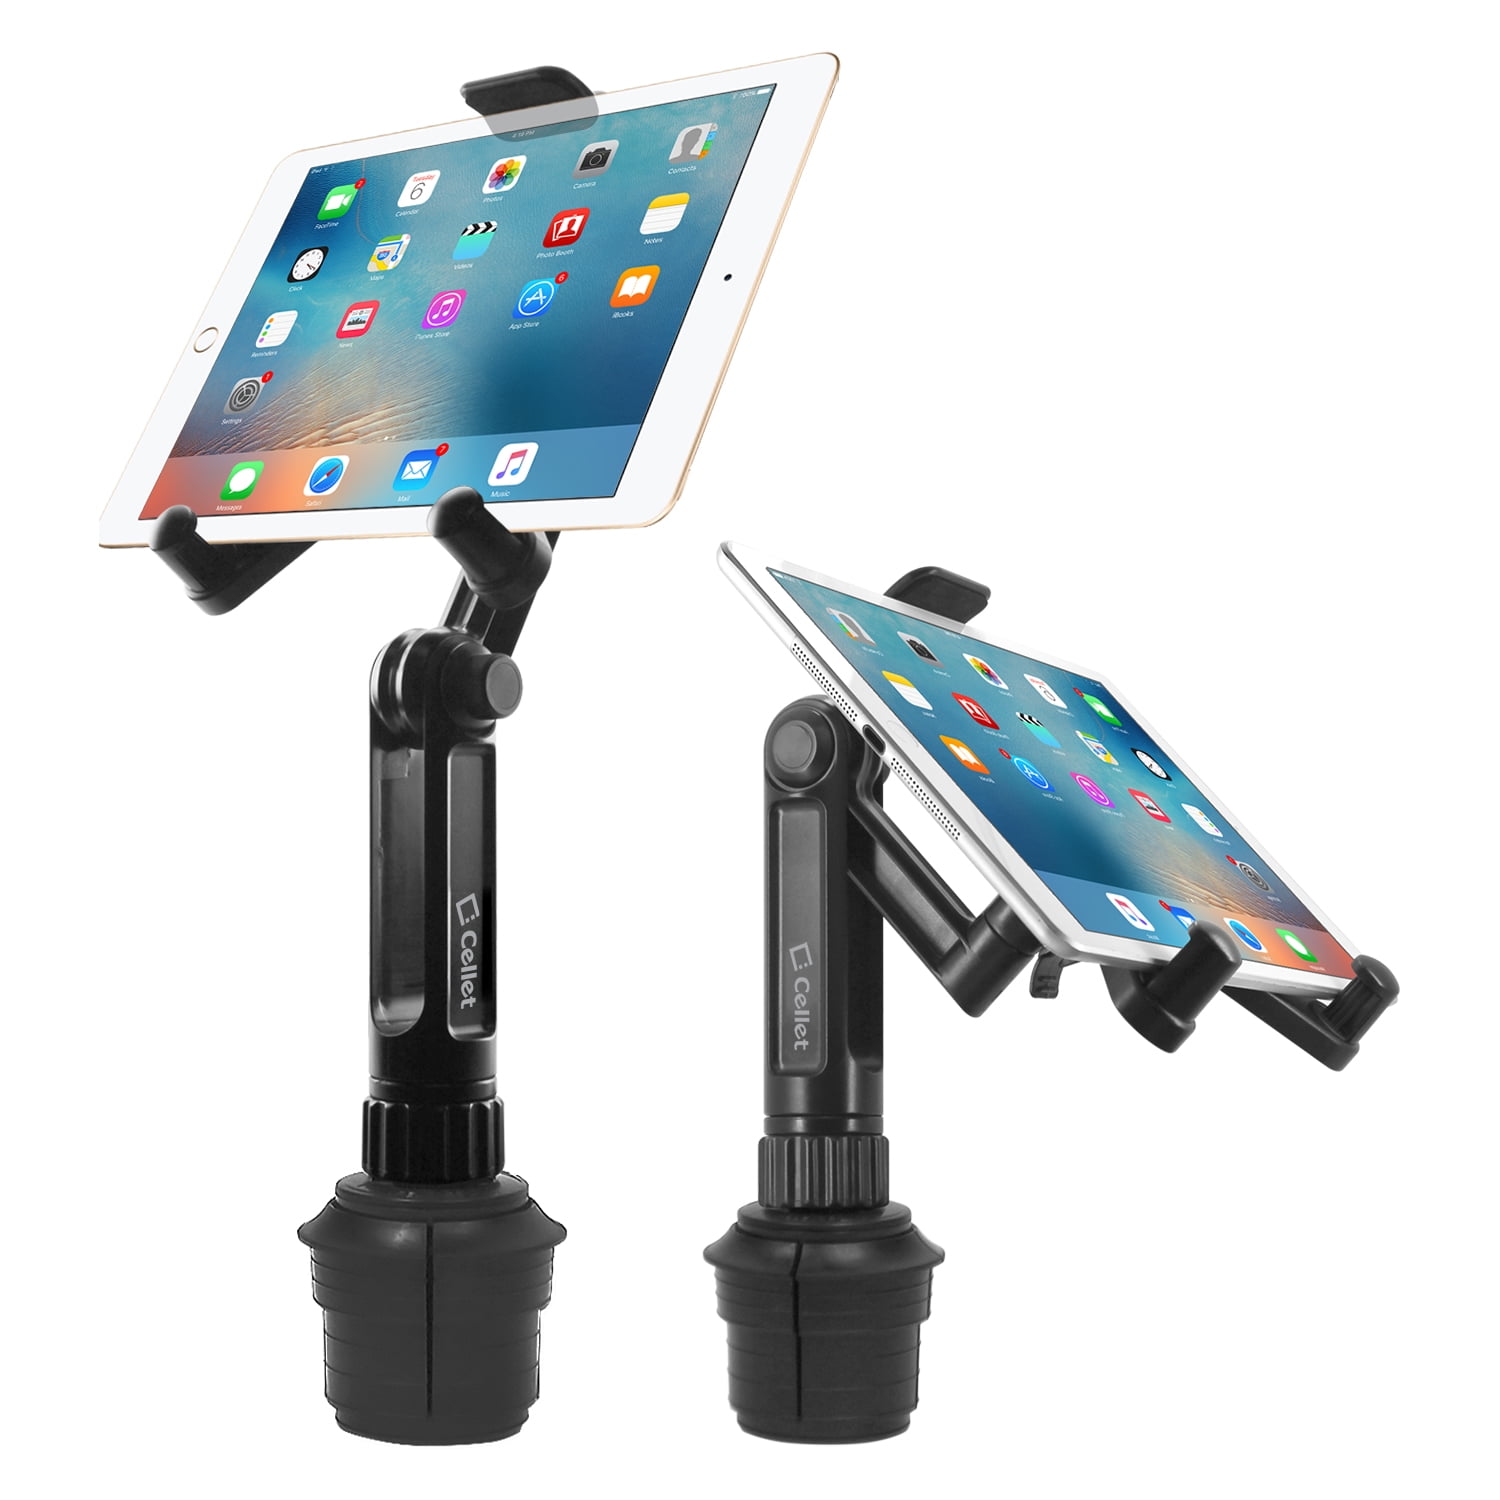 Car Tablet Holder For iPad Cup Holder Mount – Macally